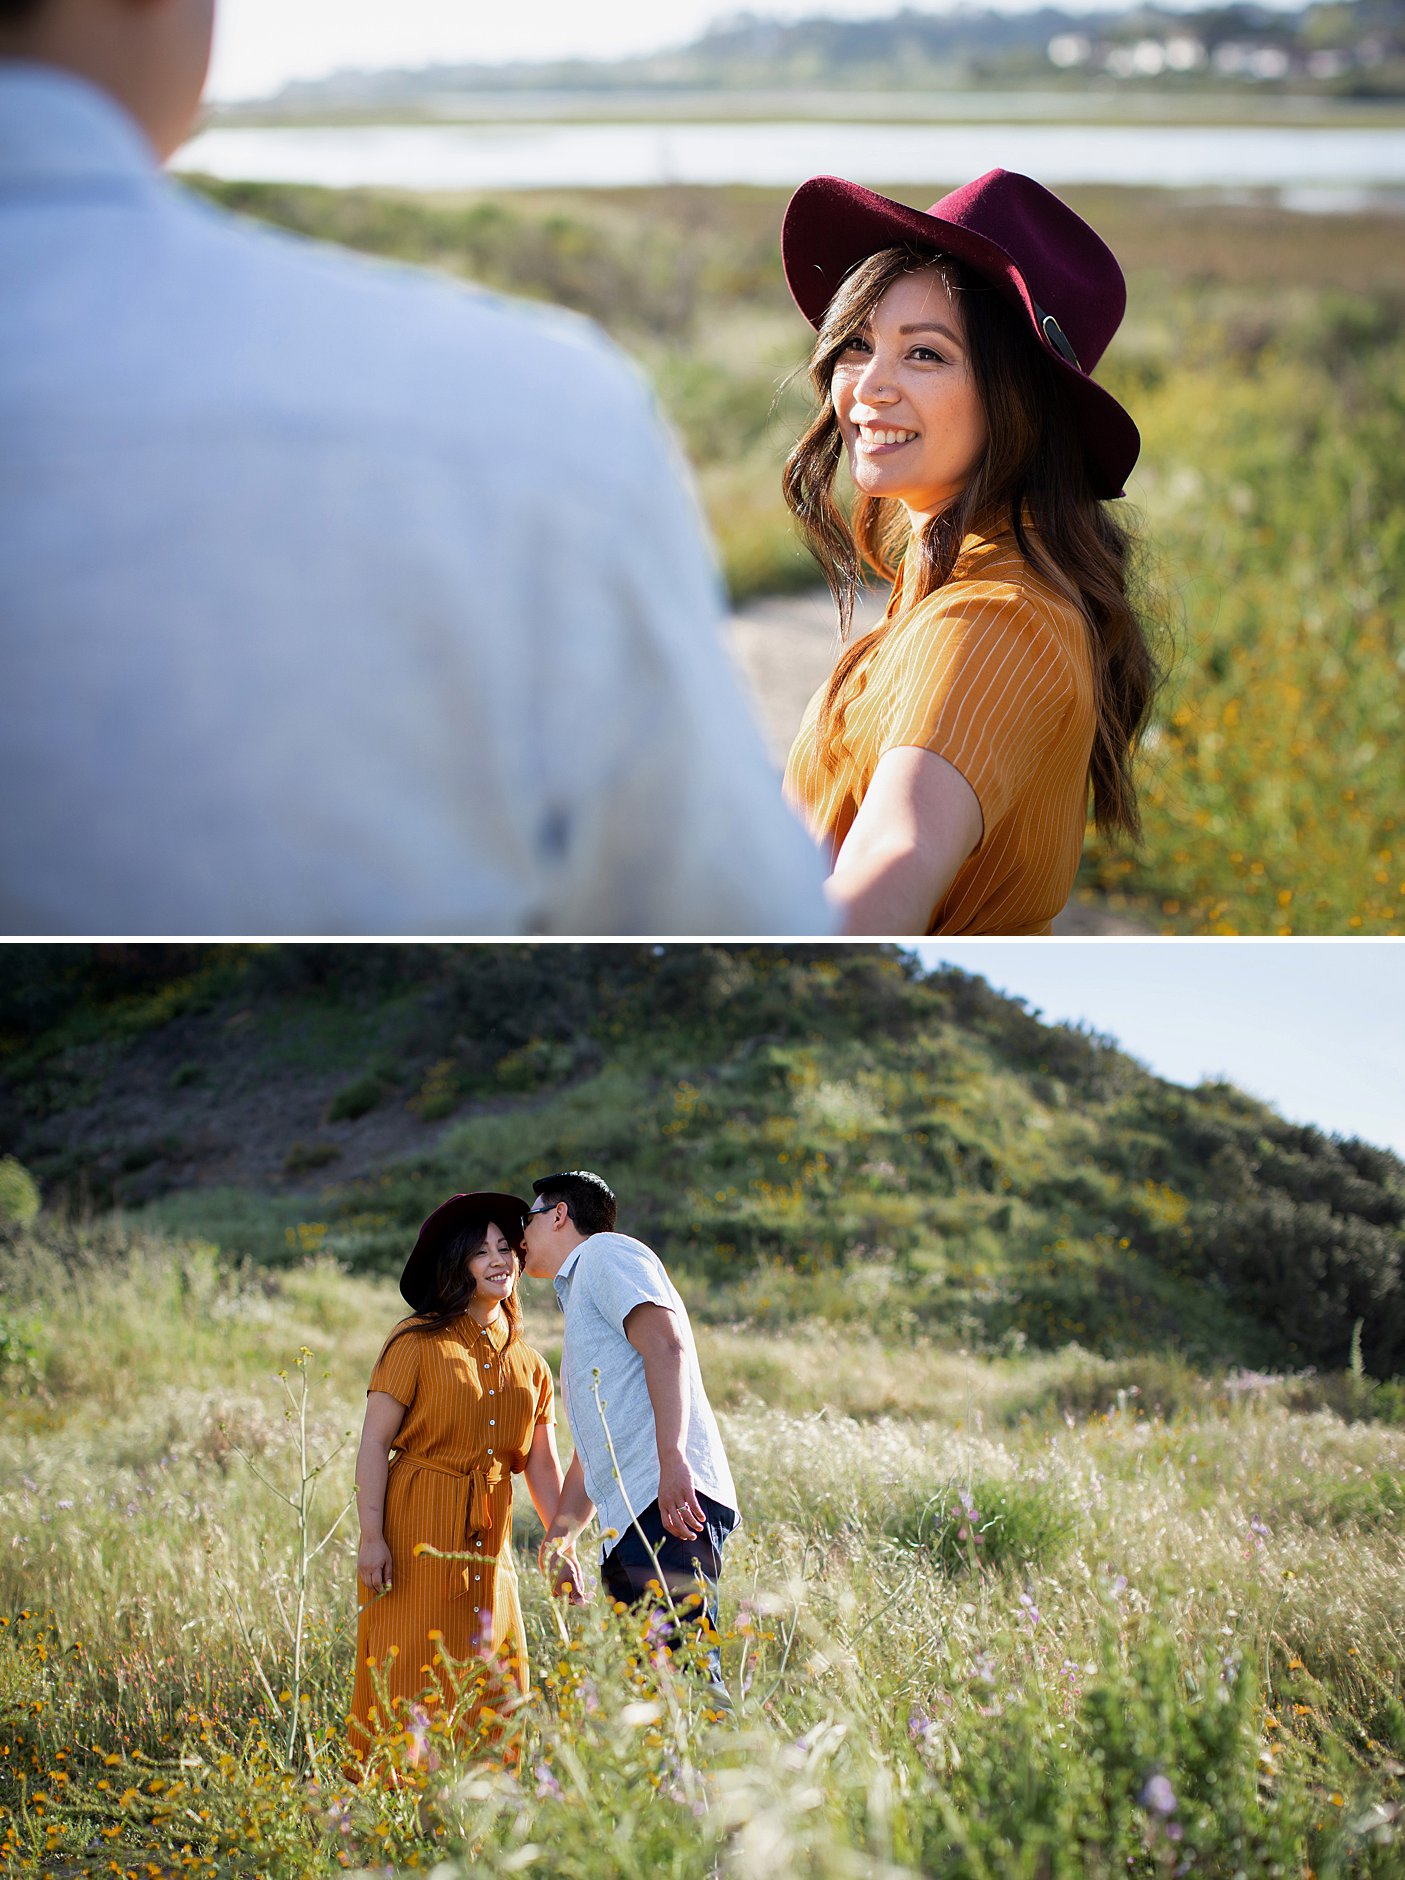 couples photography in an open field and a hat